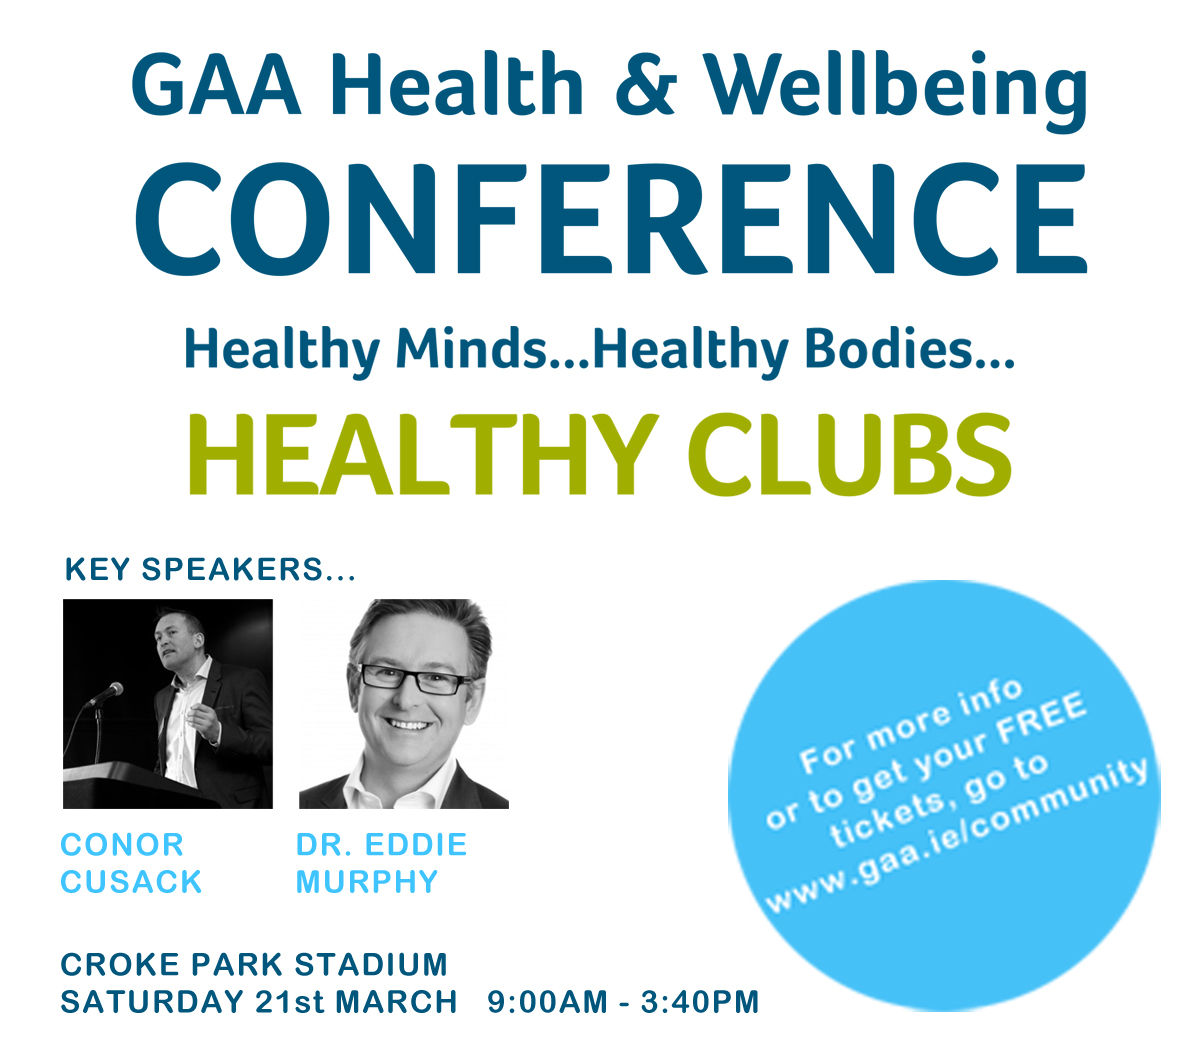 National Health & Wellbeing Conference